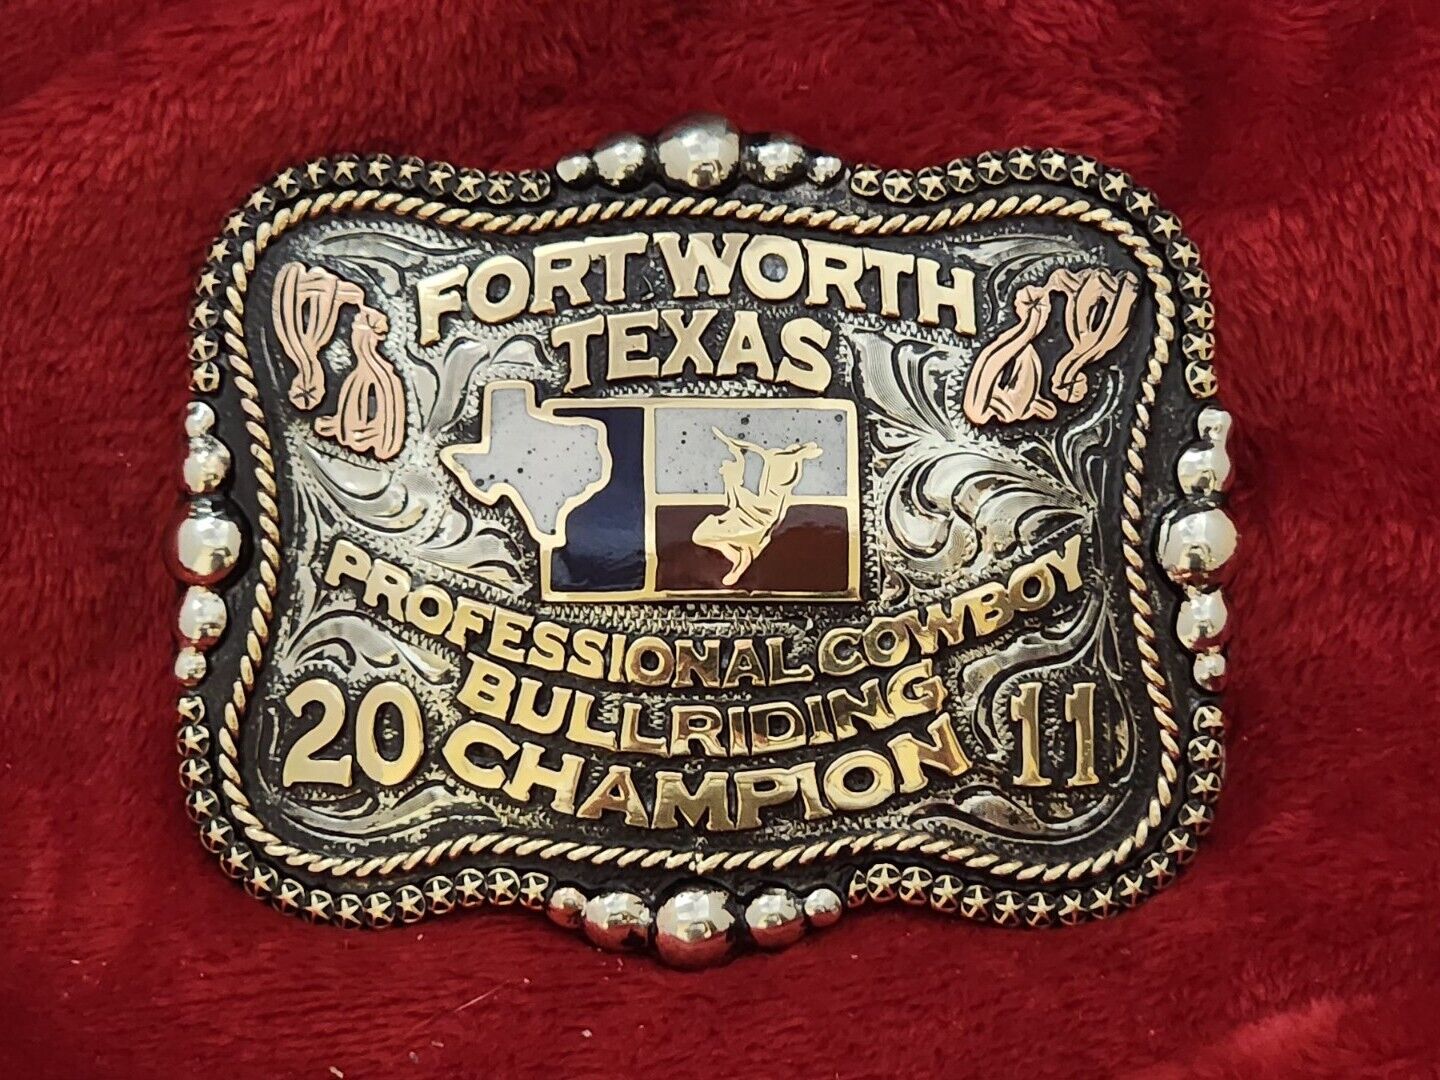 CHAMPION RODEO TROPHY BELT BUCKLE FORT WORTH TEXAS BULL RIDING☆2011☆RARE☆120